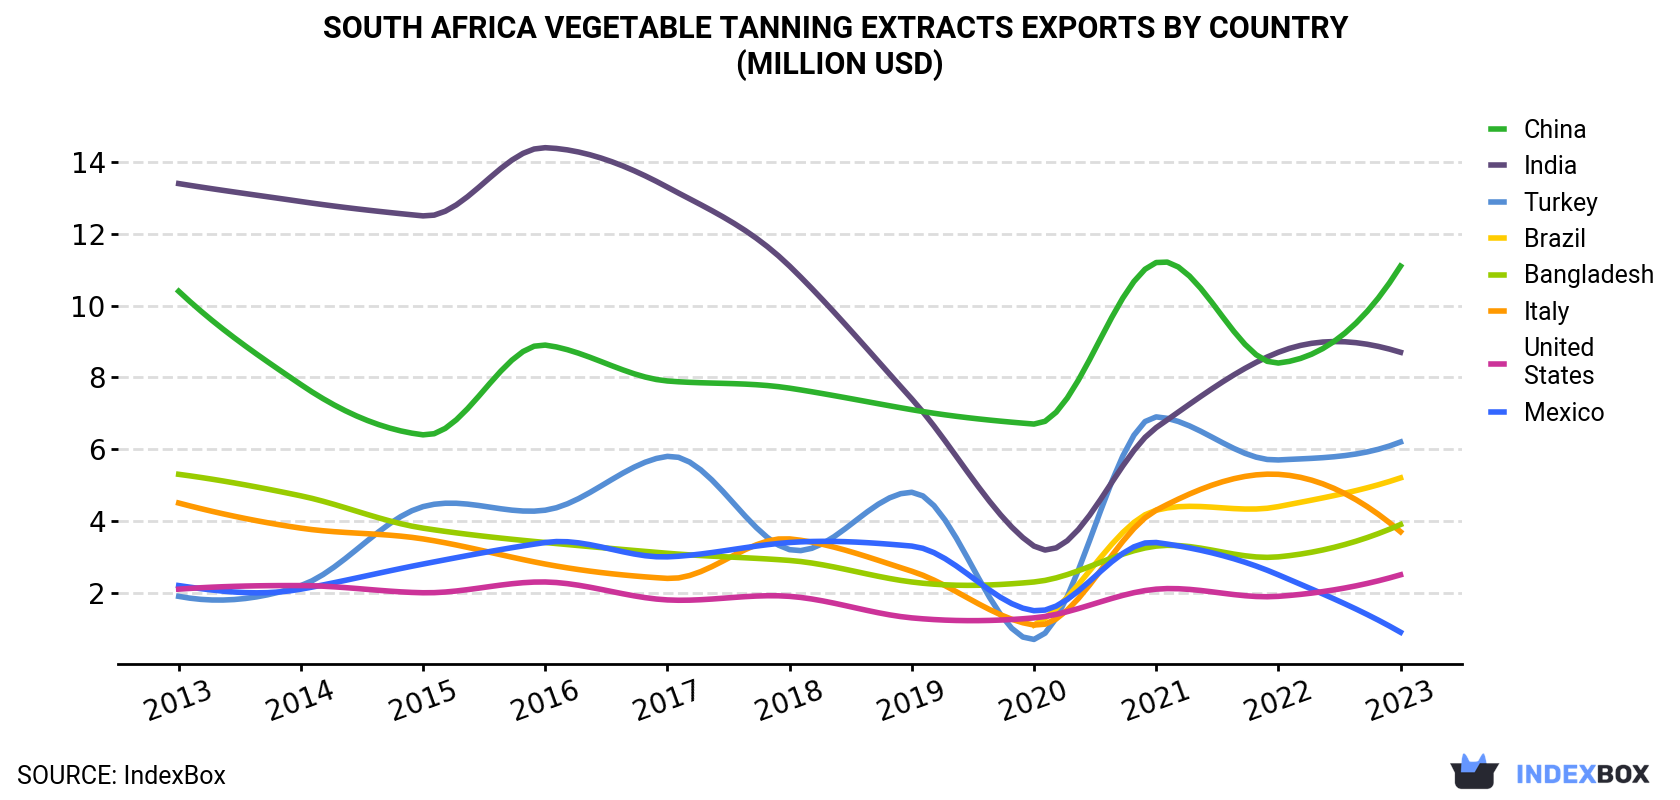 South Africa Vegetable Tanning Extracts Exports By Country (Million USD)